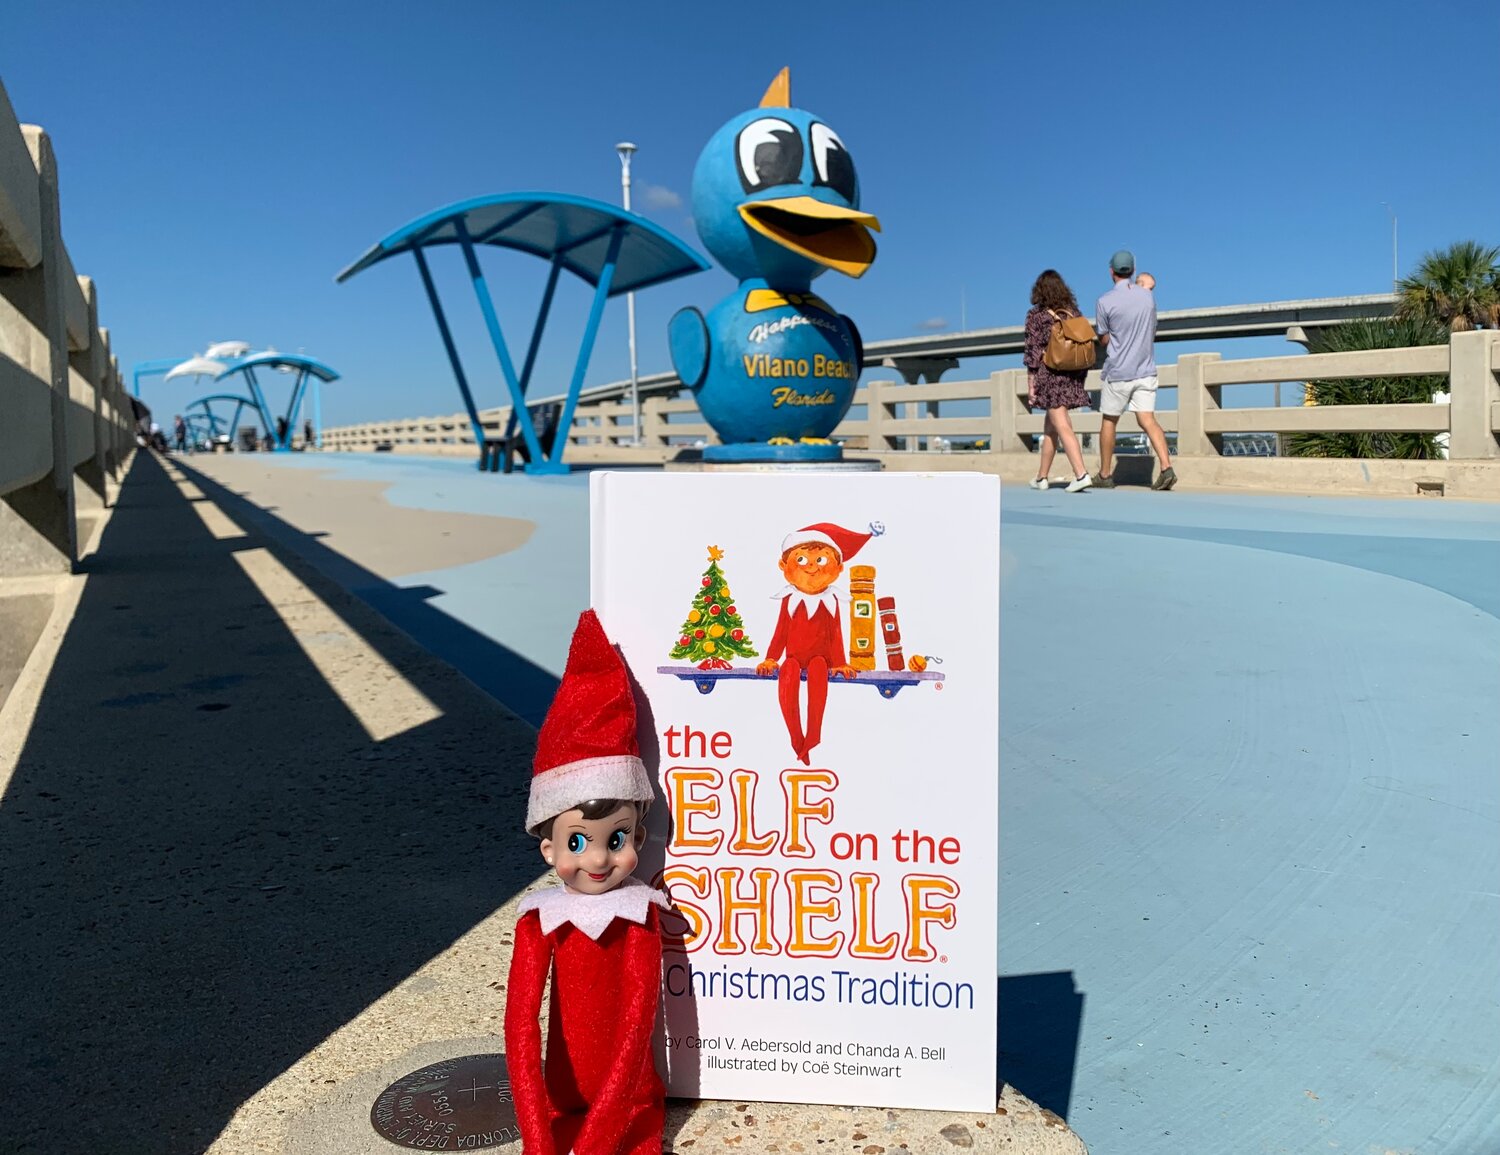 The author of “The Elf on the Shelf: A Christmas Tradition” will be featured at Vilano Holiday Village.